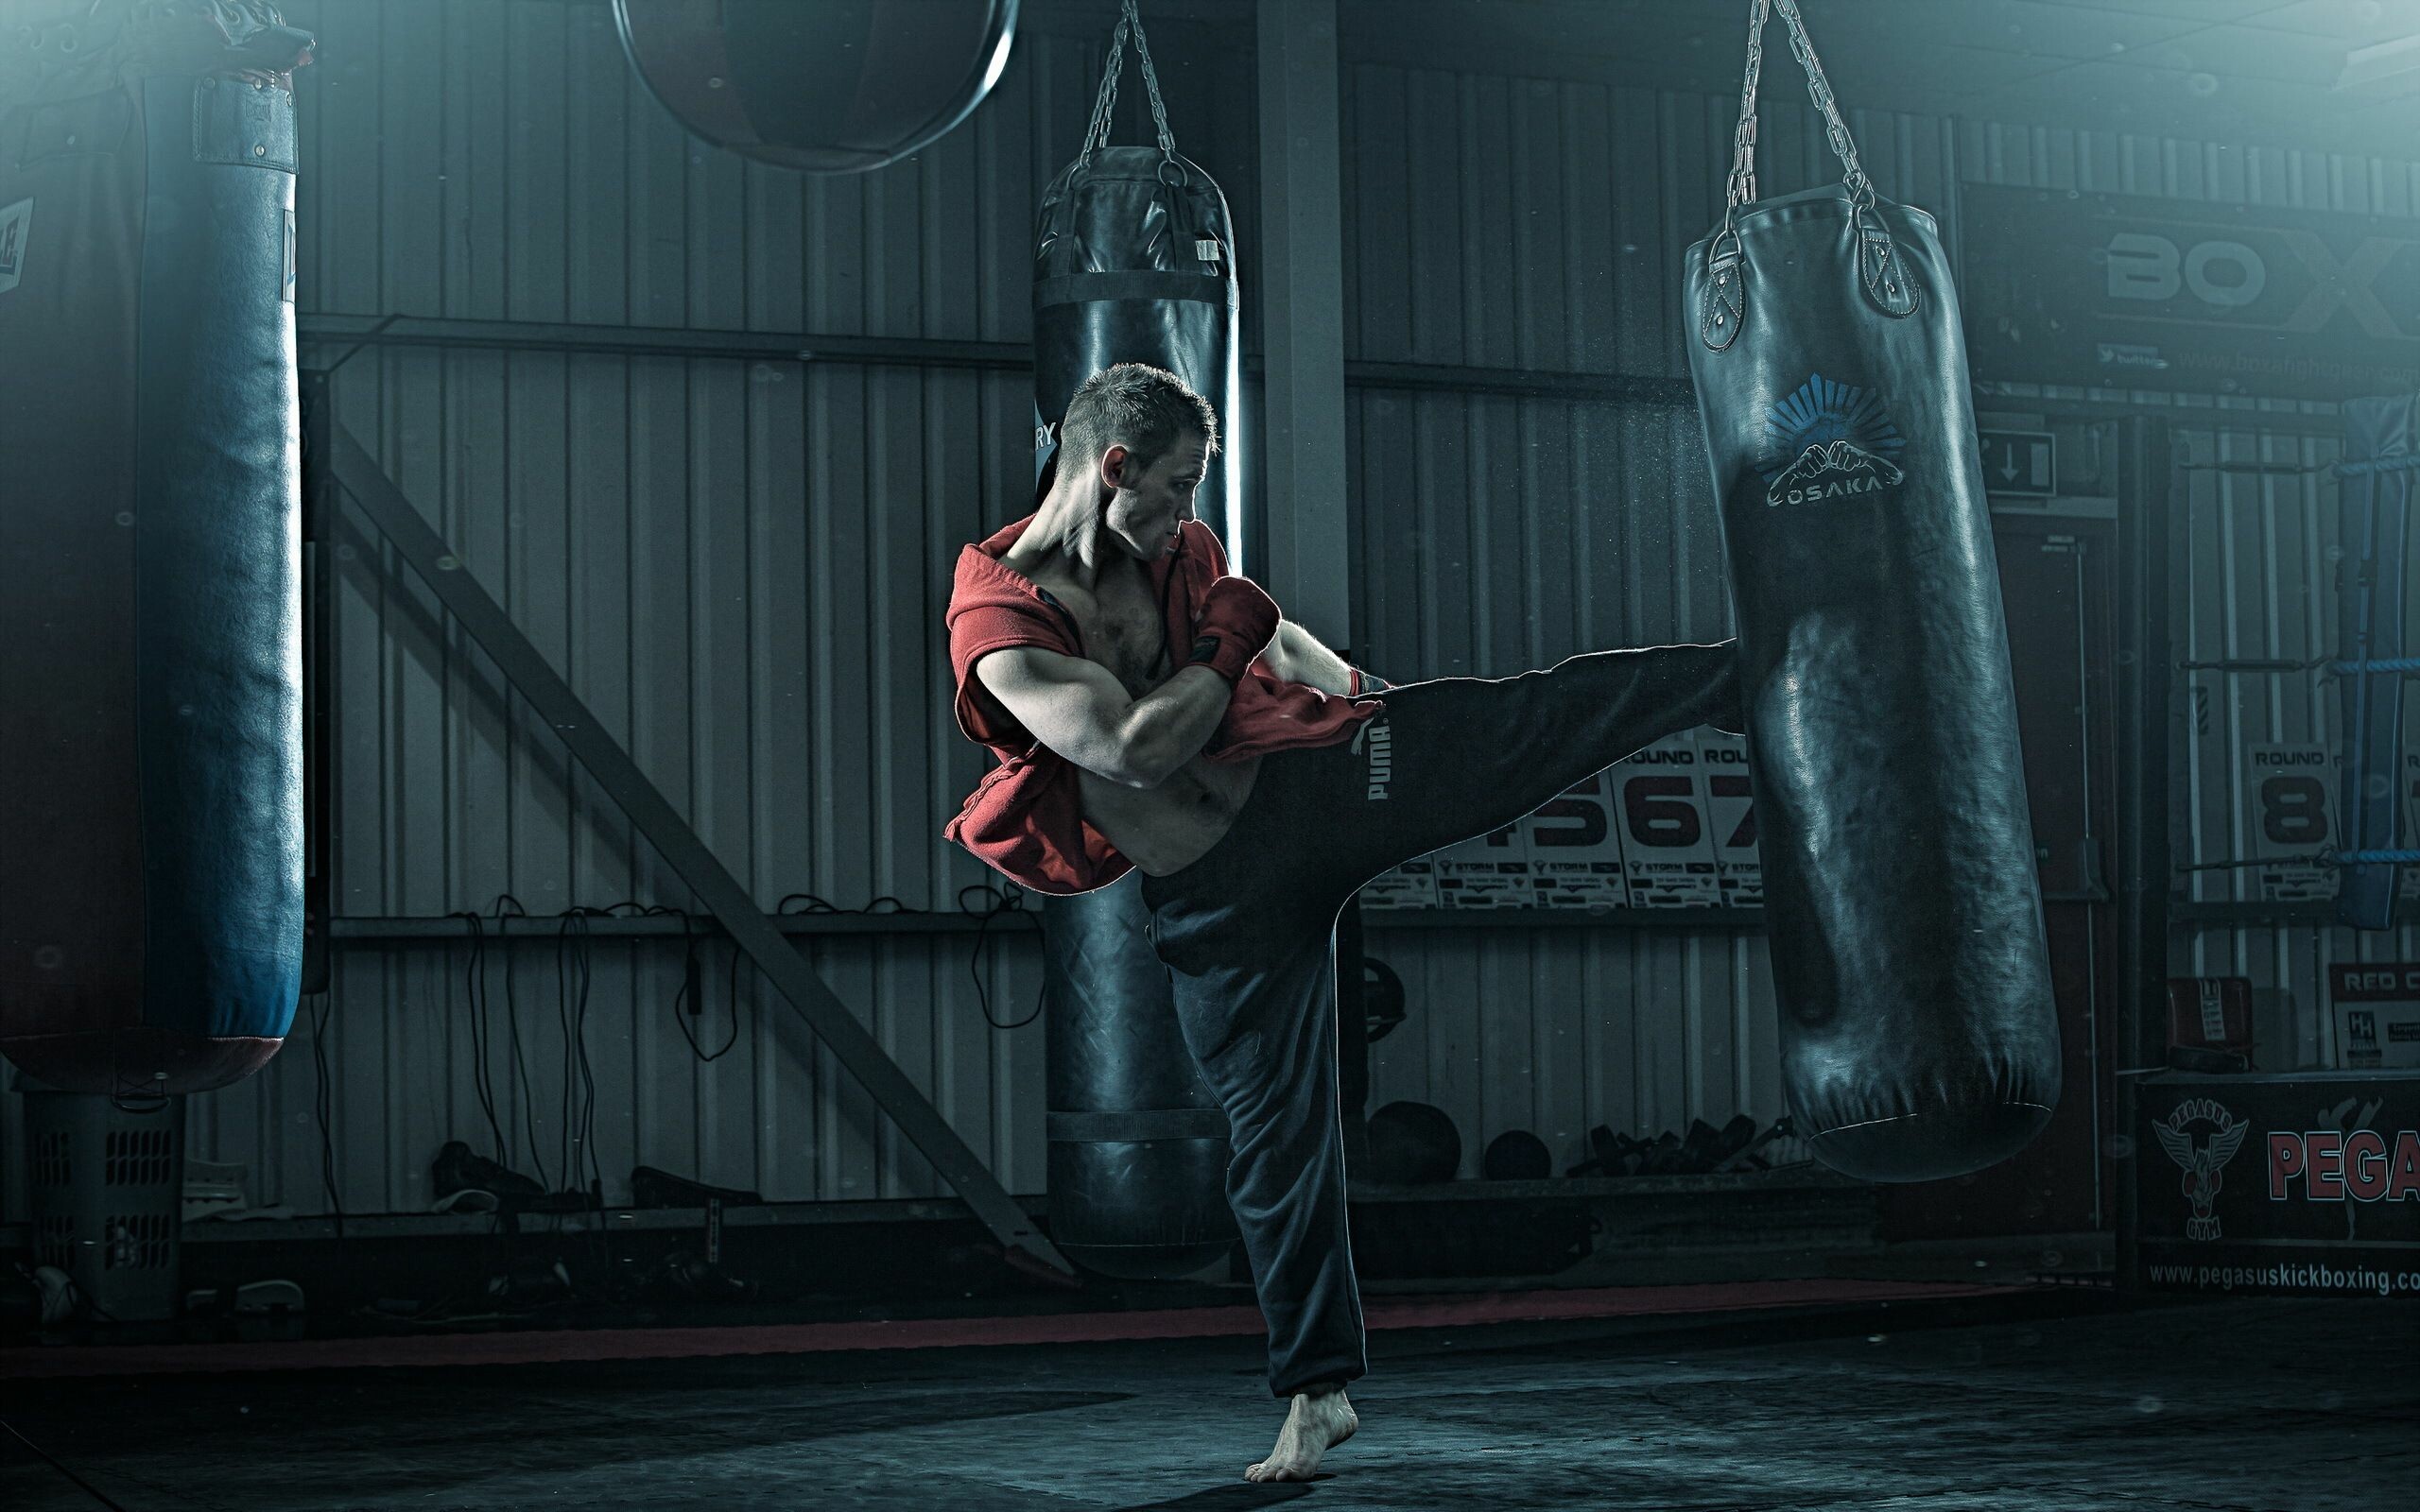 56+ Kickboxing Wallpapers: HD, 4K, 5K for PC and Mobile | Download free  images for iPhone, Android